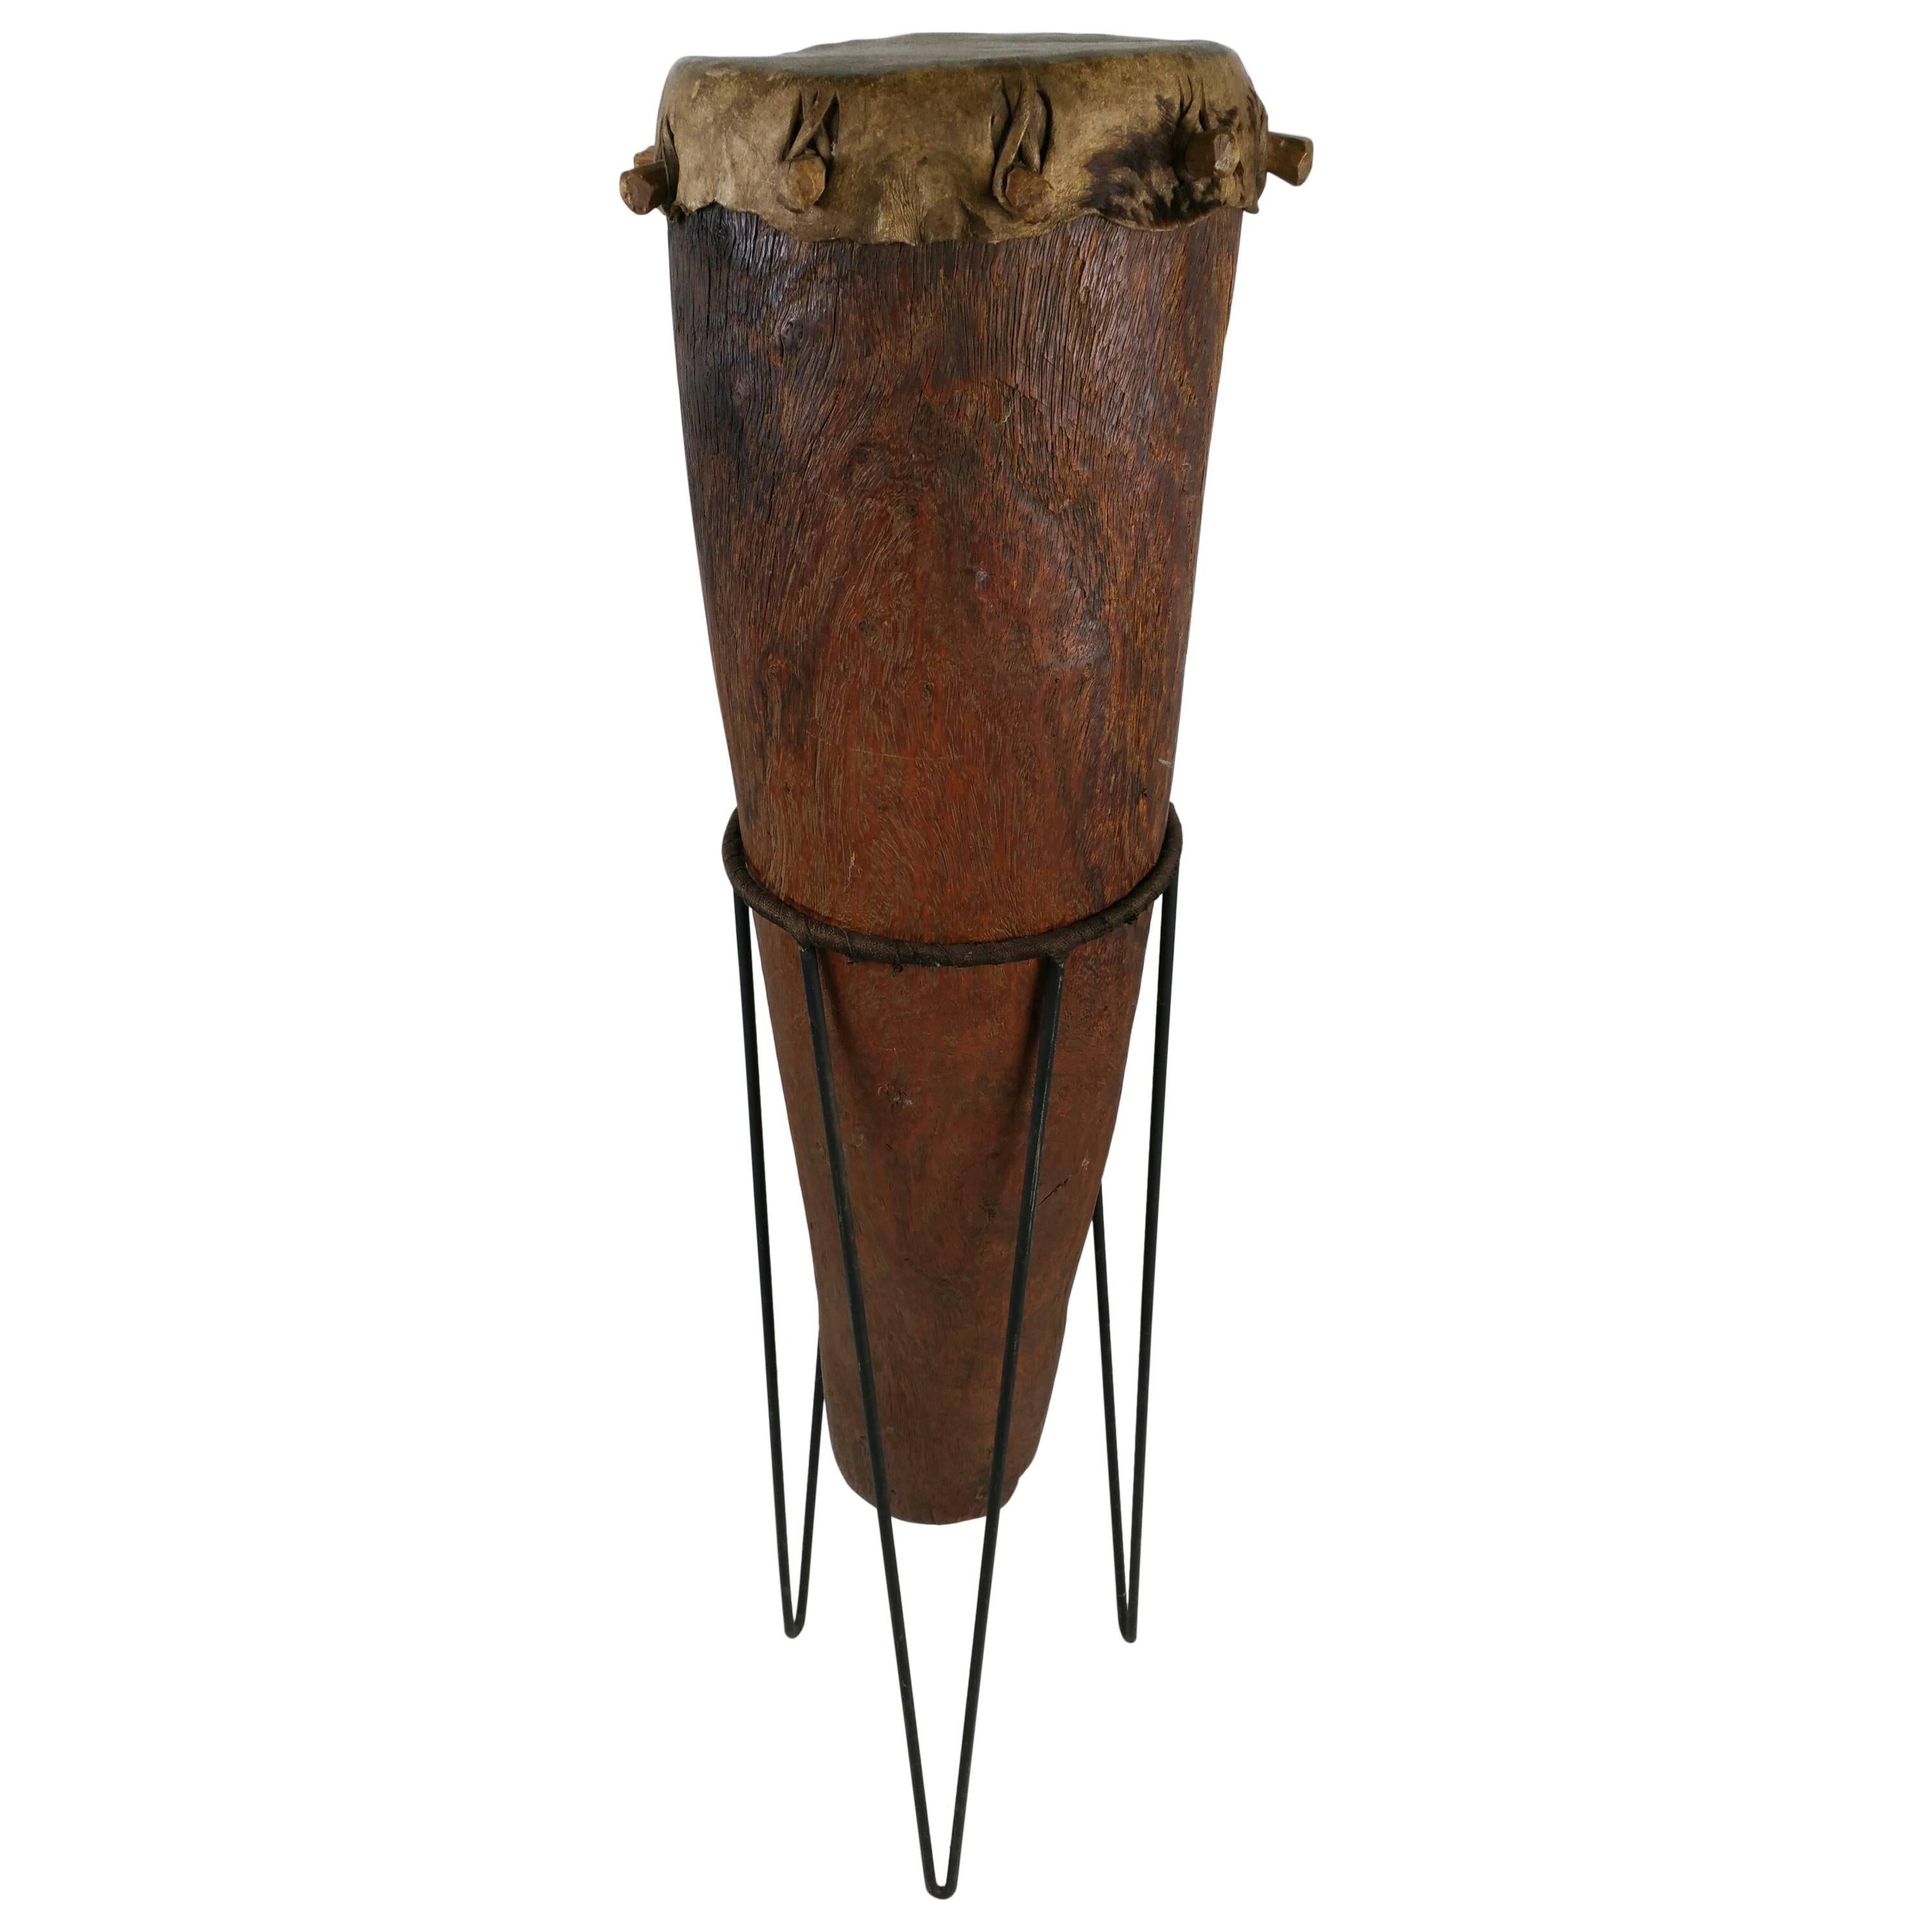 Modernist Sculptural African Drum, Wire Iron Stand For Sale